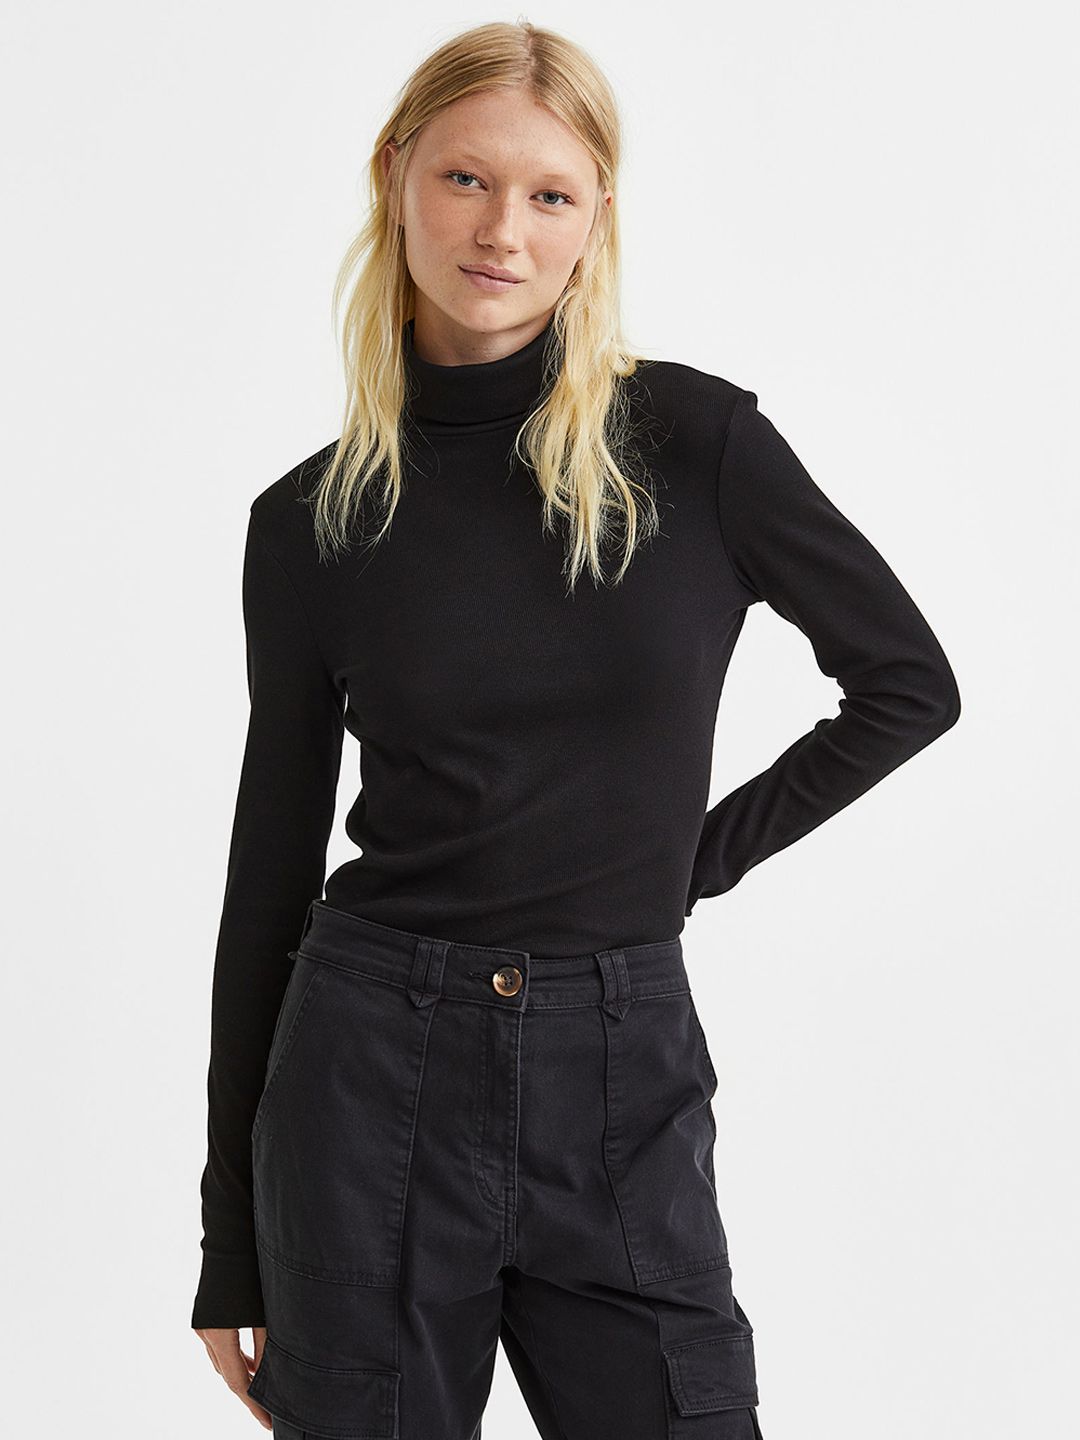 H&M Black Solid Modal-Blend Polo-Neck Top Price in India